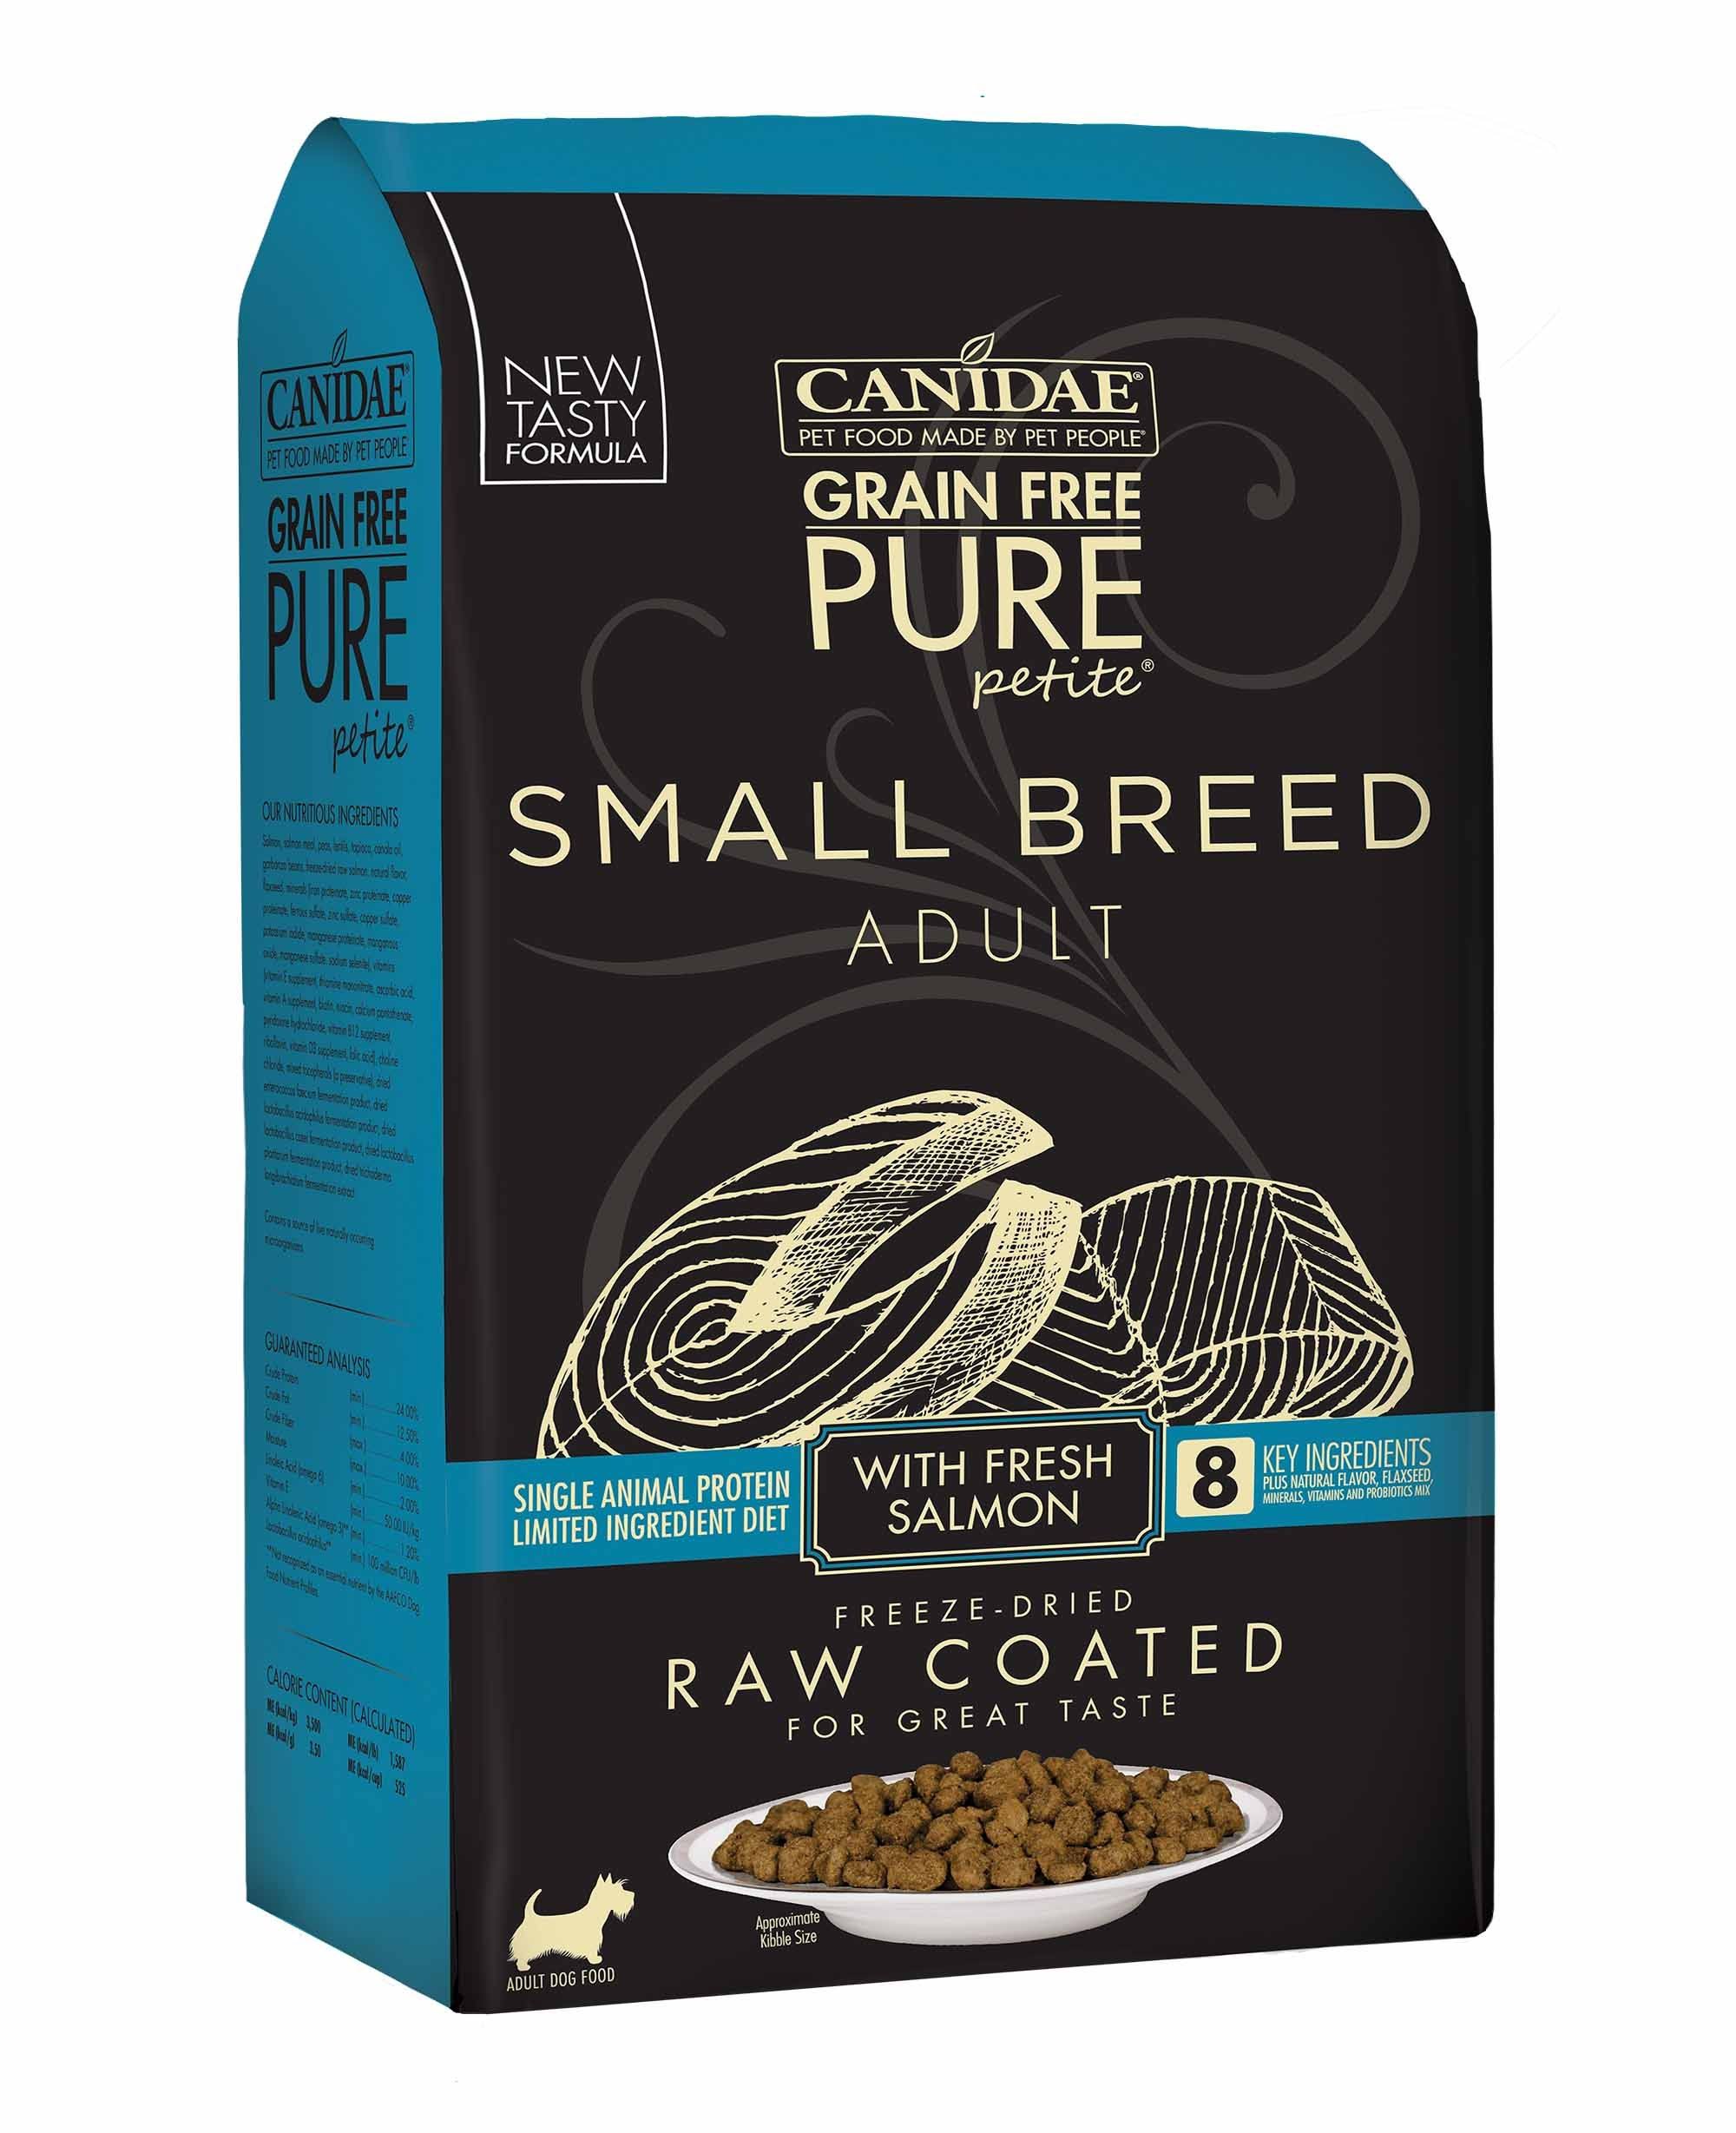 CANIDAE Pure Petite Limited Ingredient Premium Small Breed Adult Dry Dog Food, Grain Free, Premium Clean Proteins